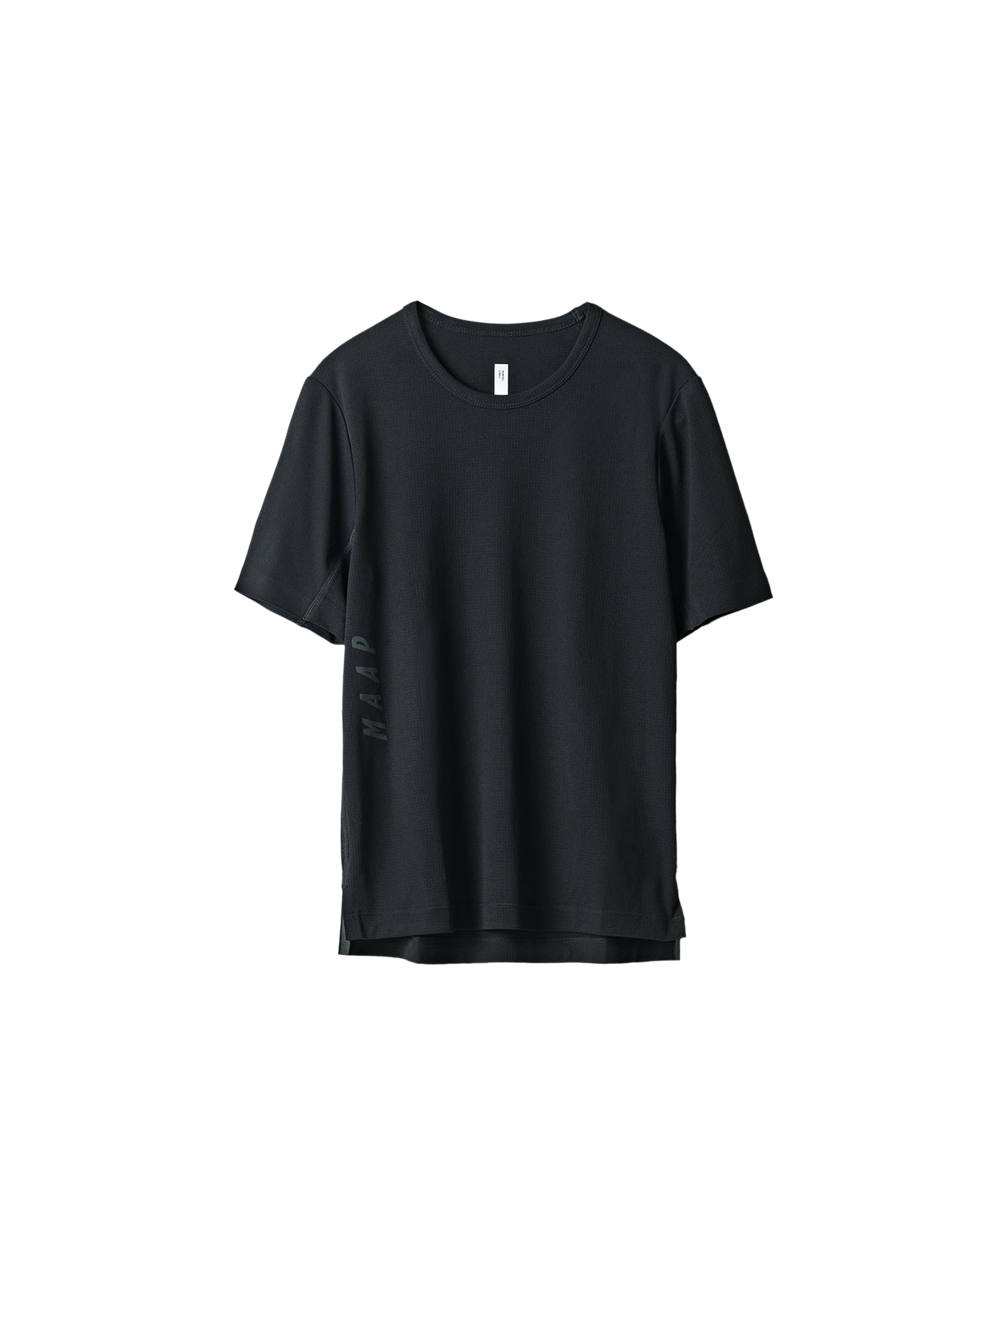 Product Image for Women's Alt_Road Tee